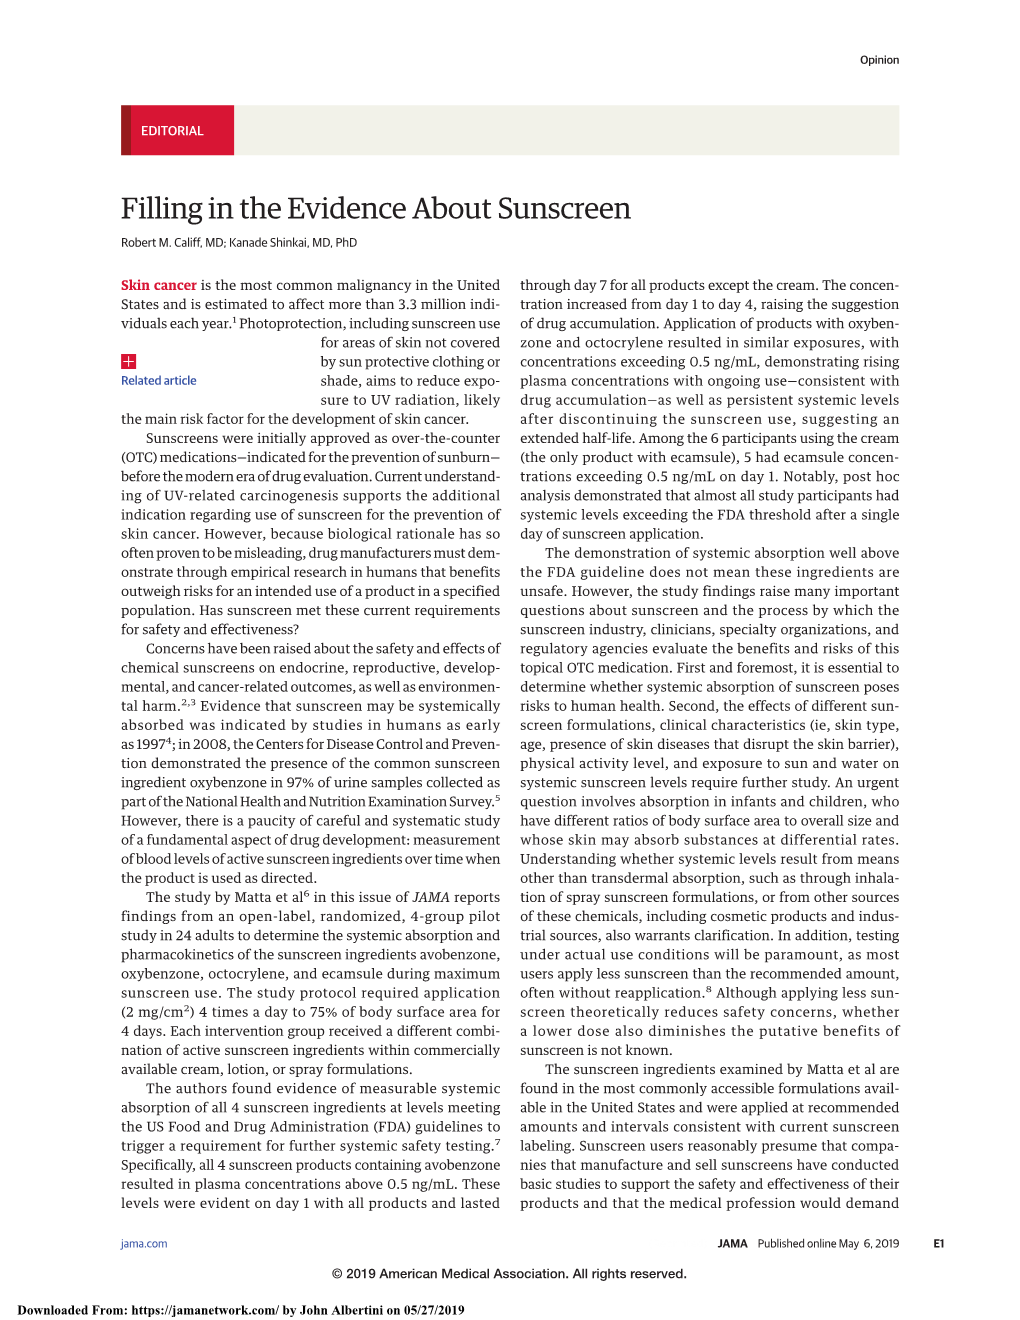 Filling in the Evidence About Sunscreen Robert M